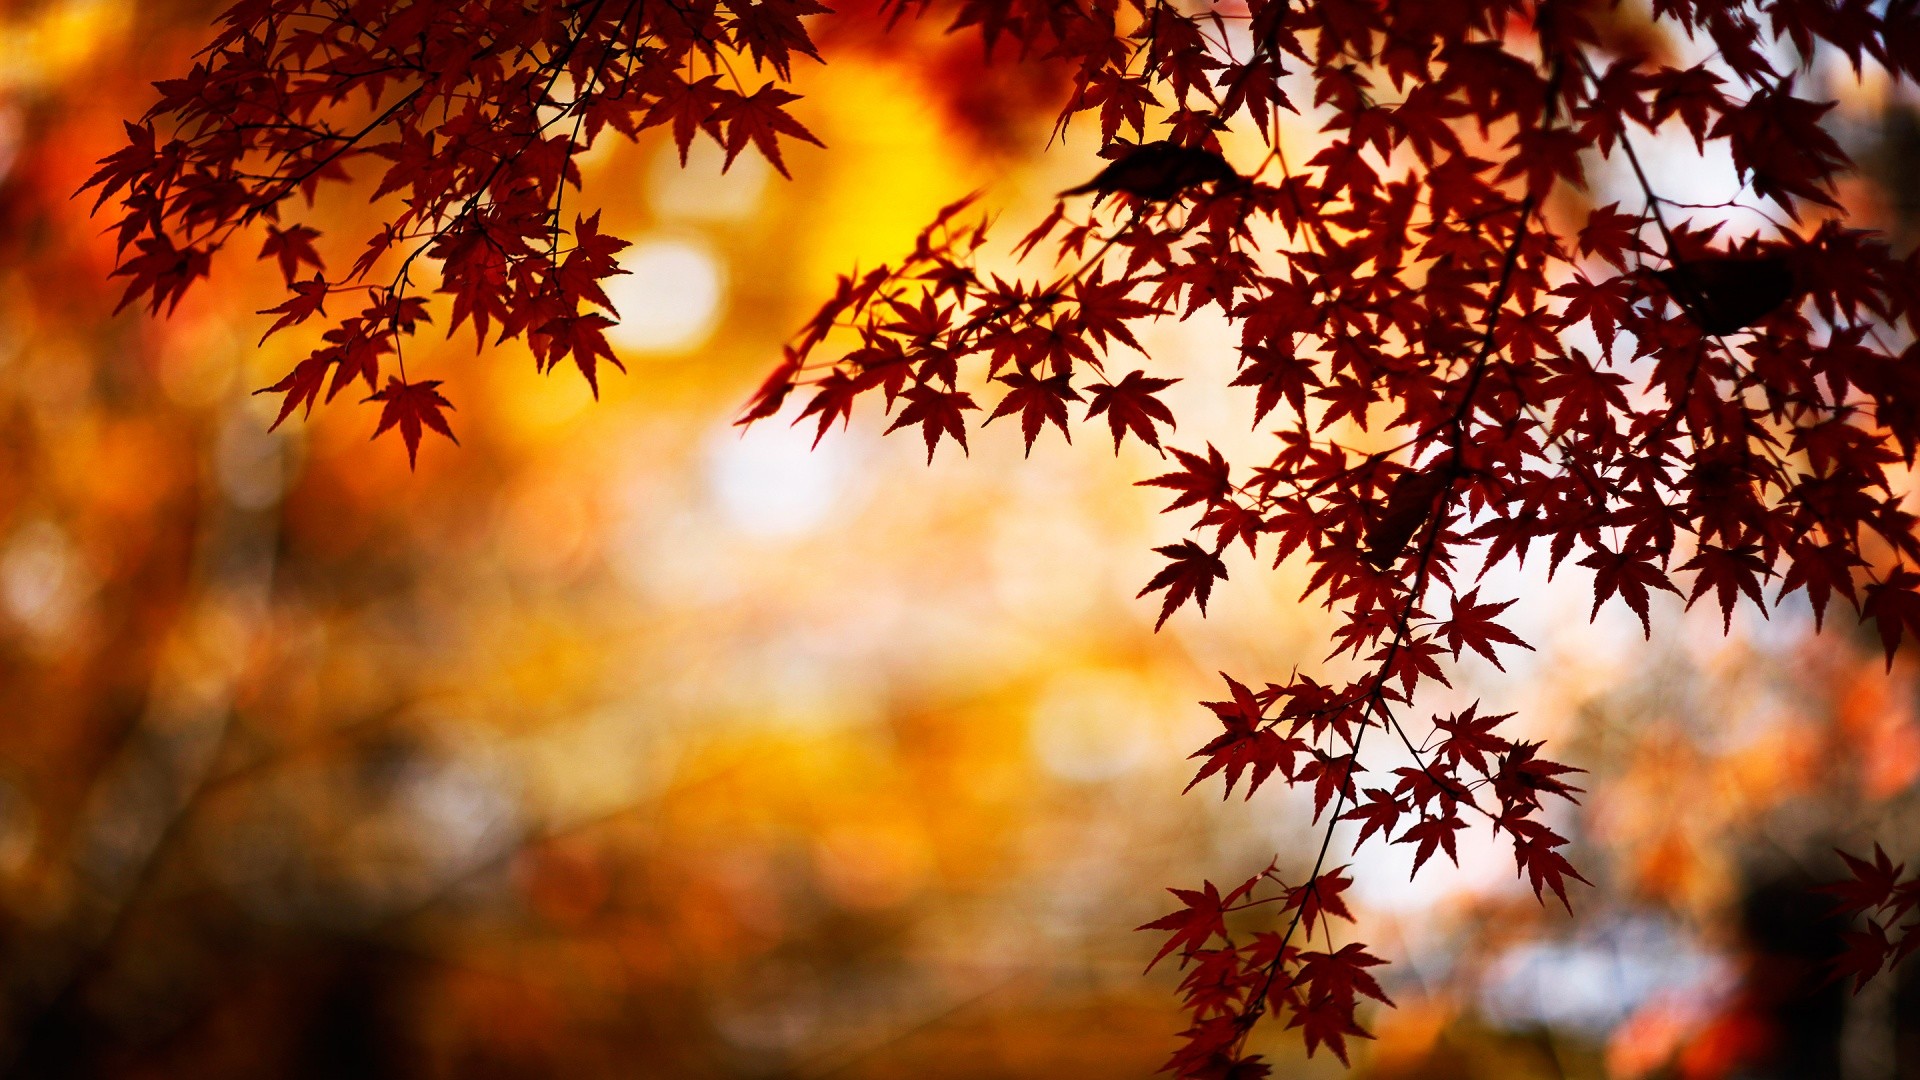 Wallpaper Fall nice hd wallpapers with red and orange colors